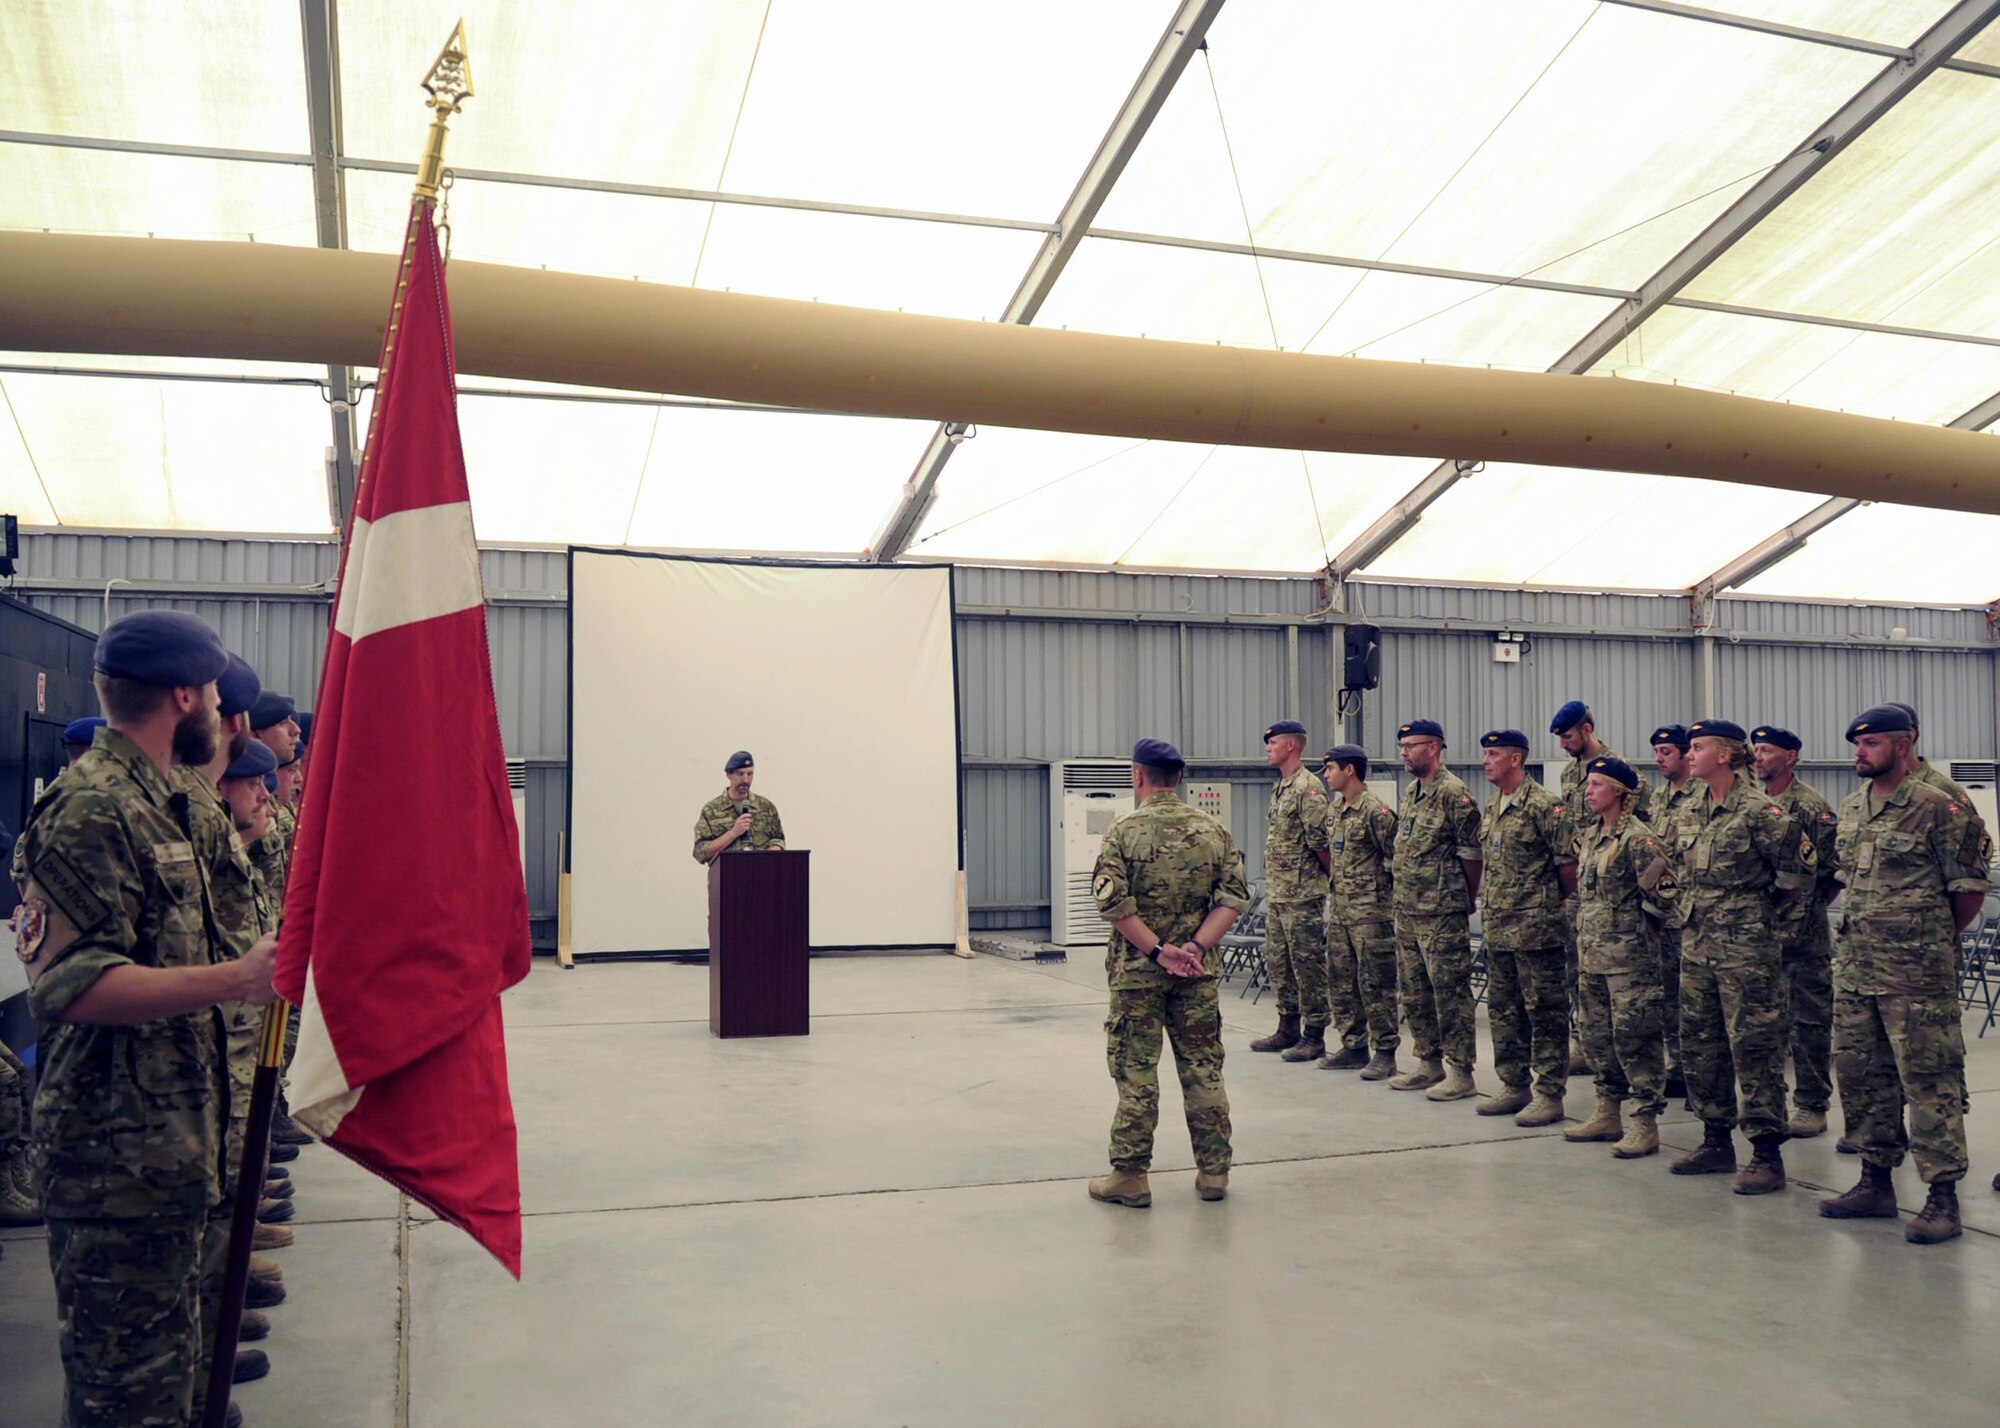 Royal Danish Air Force Lt. Col. John Pedersen, right, Team 7 Detachment commander, passes the Dannebrog, national flag of Denmark, to Royal Danish Air Force Lt. Col. Claus Pedersen, left, Team 8 Detachment commander, during a change of command ceremony June 29, 2017, at an undisclosed location in southwest Asia. As Coalition partners of the 380th Air Expeditionary Wing, both Team 7 and Team 8 members serve as integrated colleagues of the 727th Expeditionary Air Control Squadron. (U.S. Air Force Photo by Senior Airman Preston Webb)